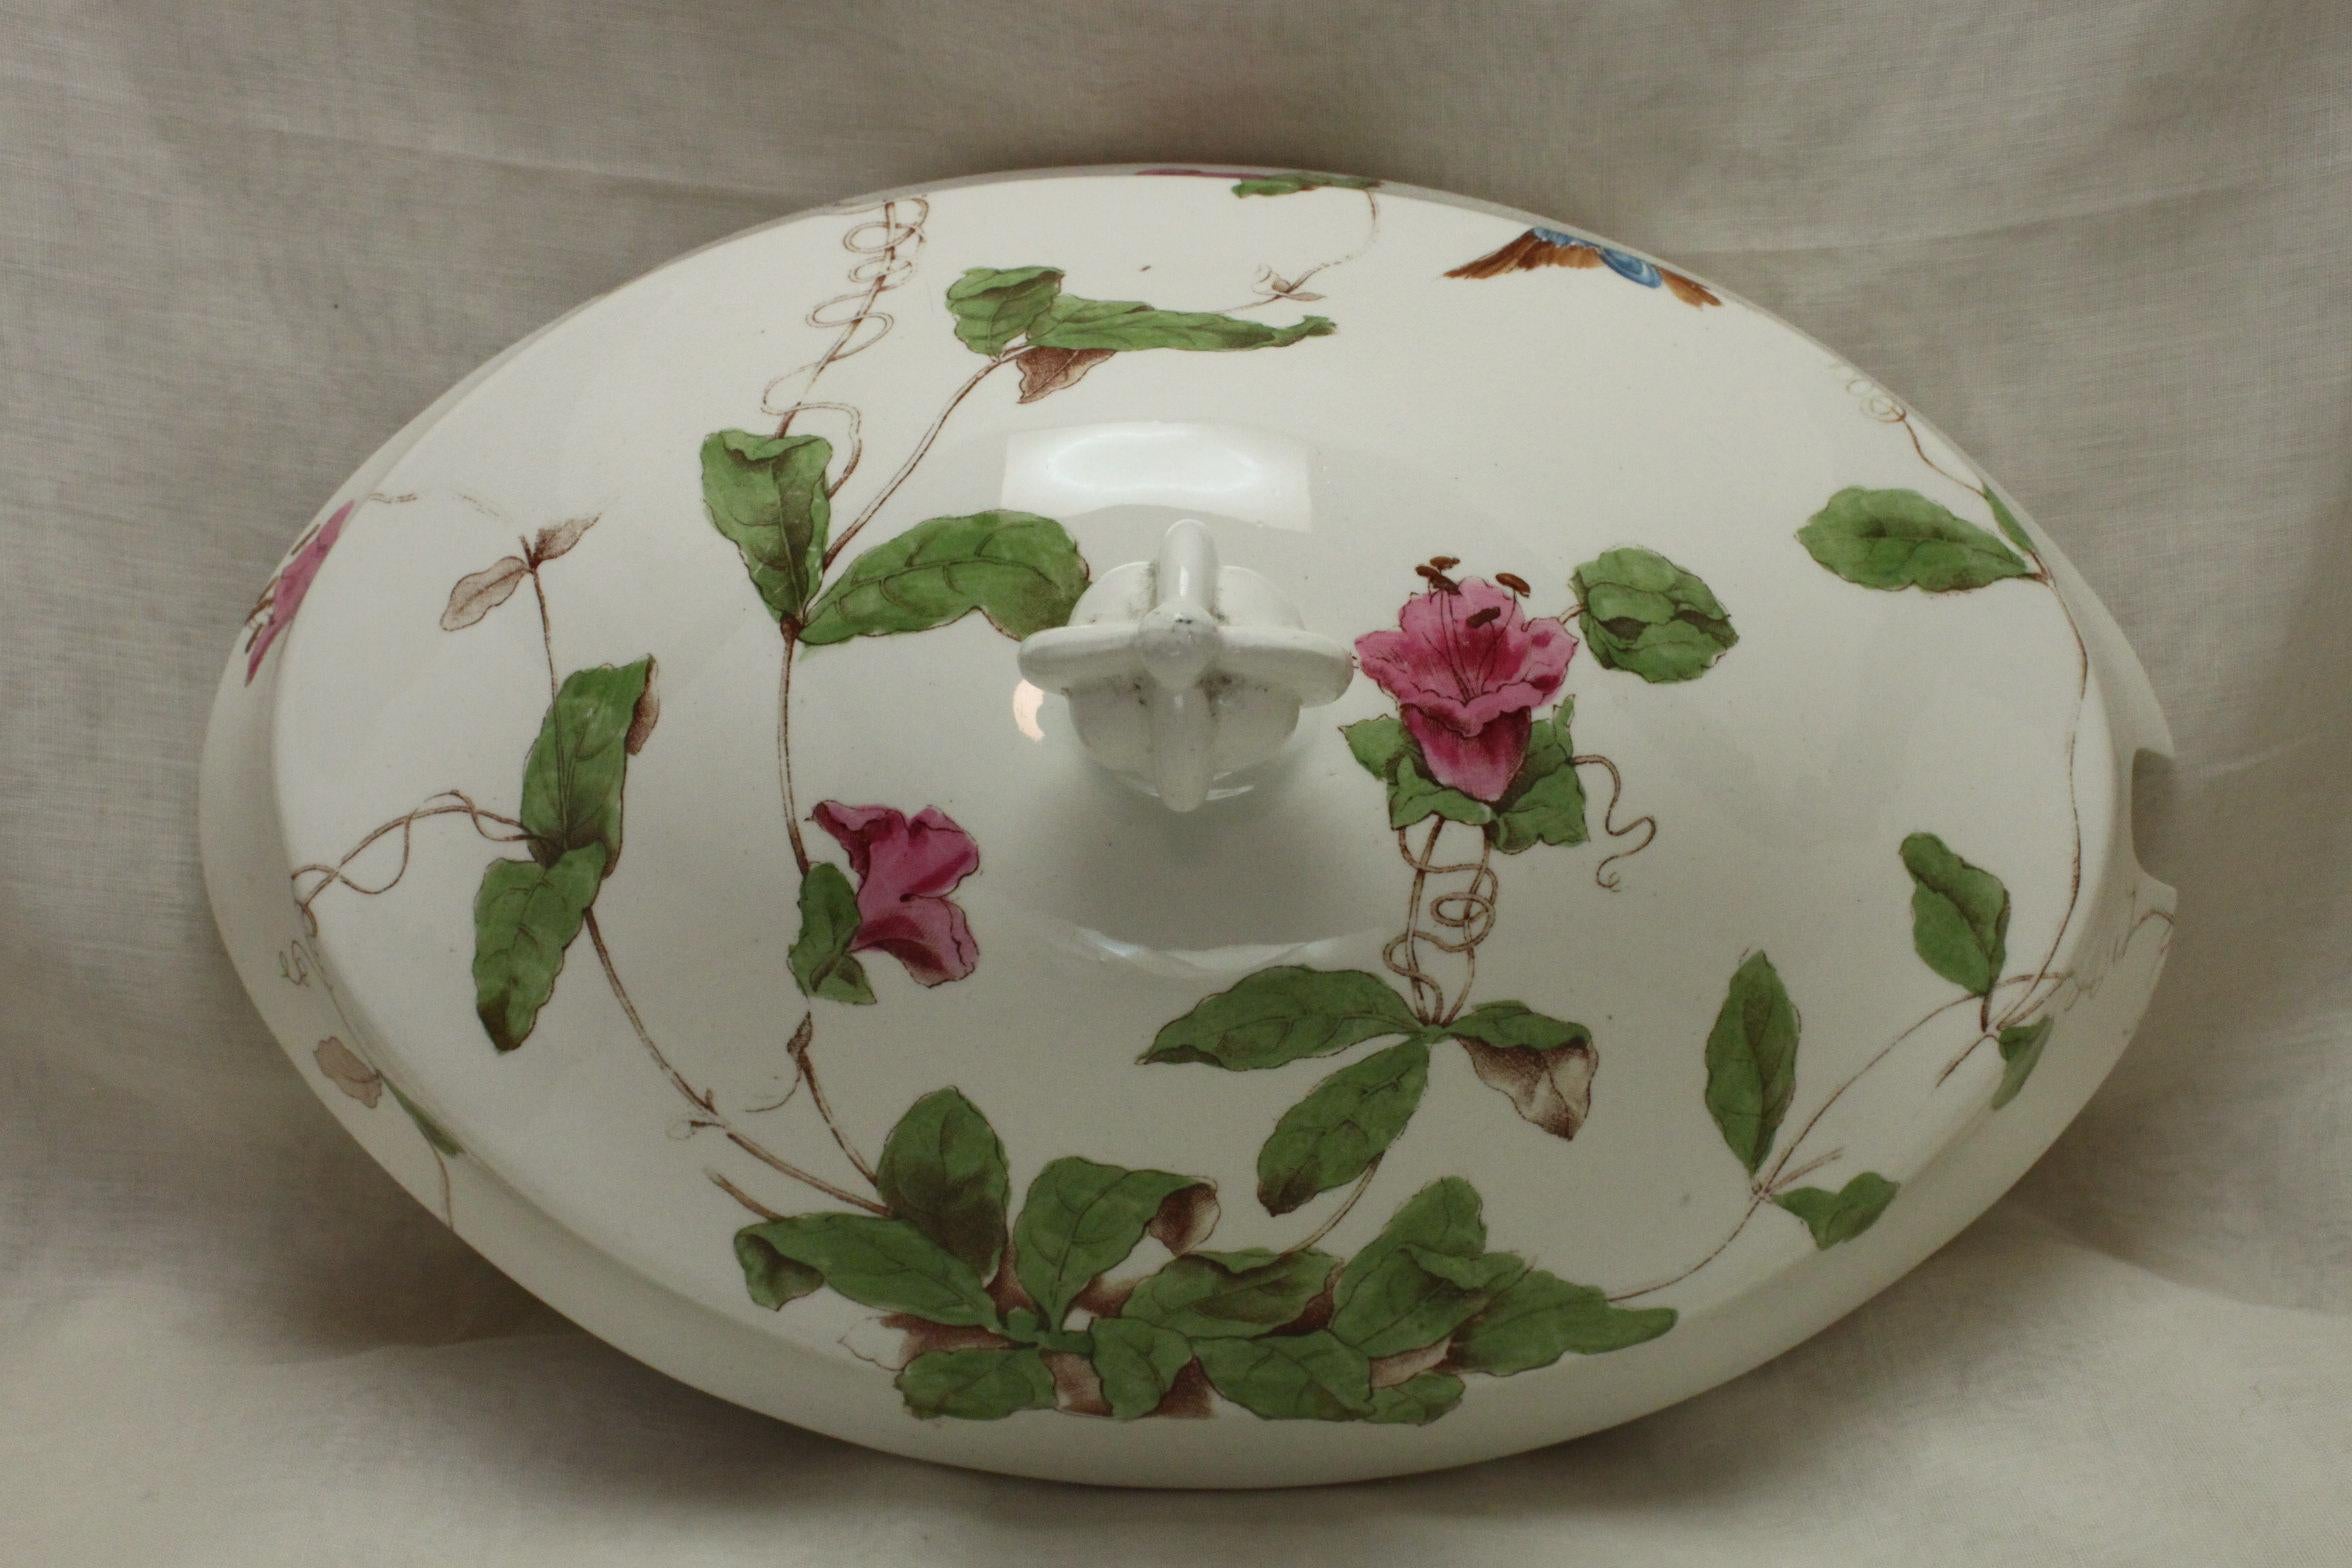 This large W T Copeland boat shaped, lidded soup tureen on stand, is decorated with a hand coloured printed pattern featuring climbing plants, flowers, hummingbirds and butterflies. Fittingly the name given to this shape of dinnerware is Venice,